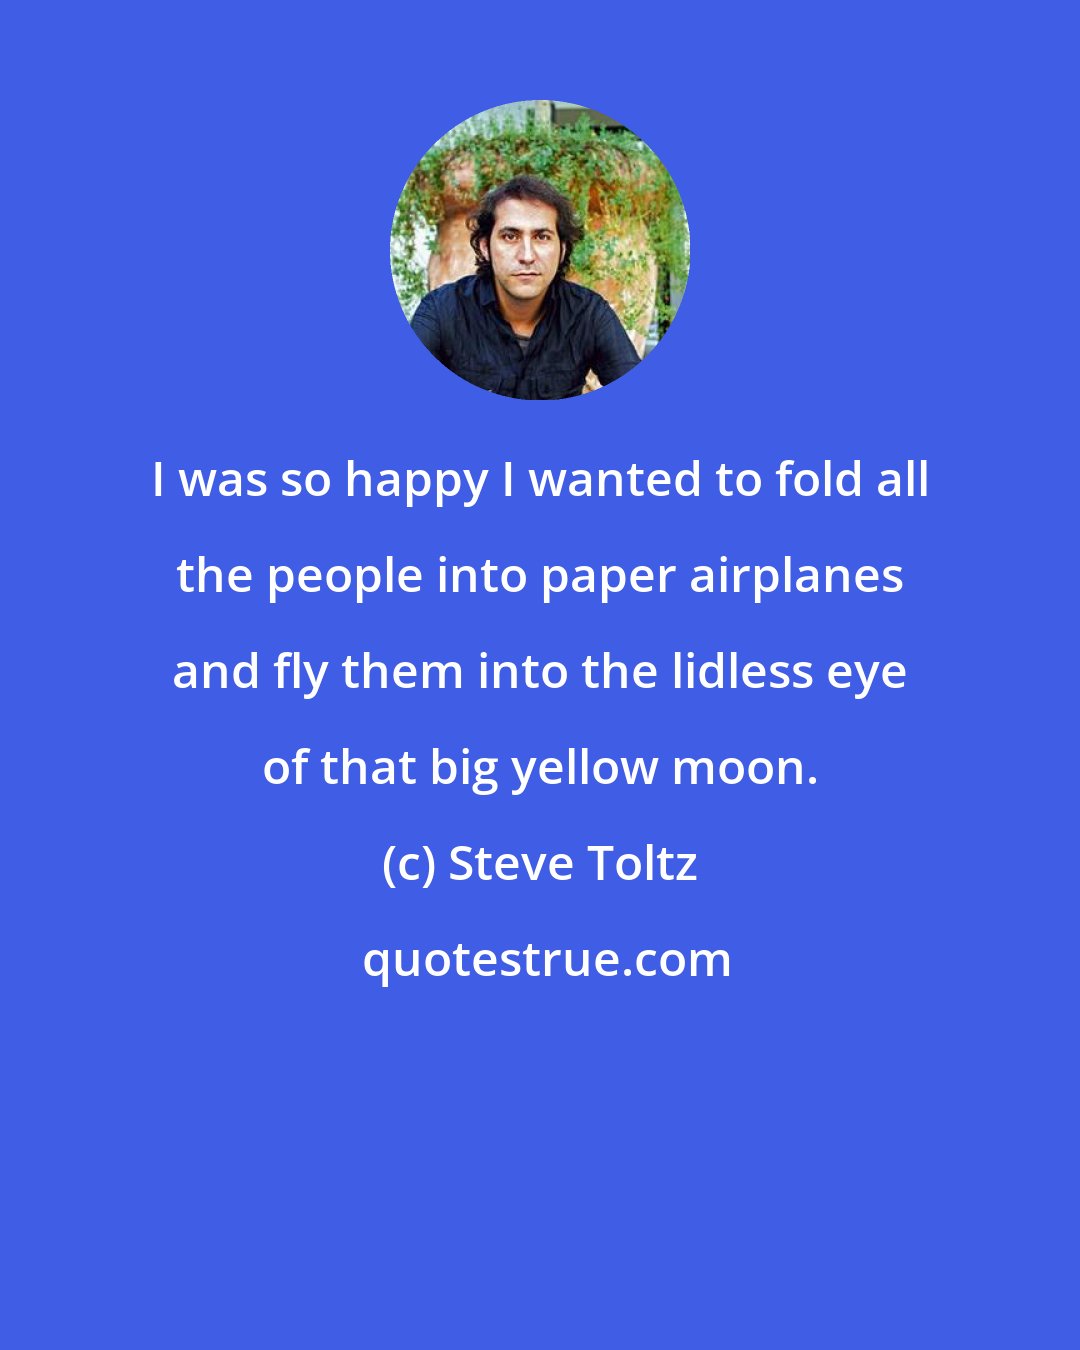 Steve Toltz: I was so happy I wanted to fold all the people into paper airplanes and fly them into the lidless eye of that big yellow moon.